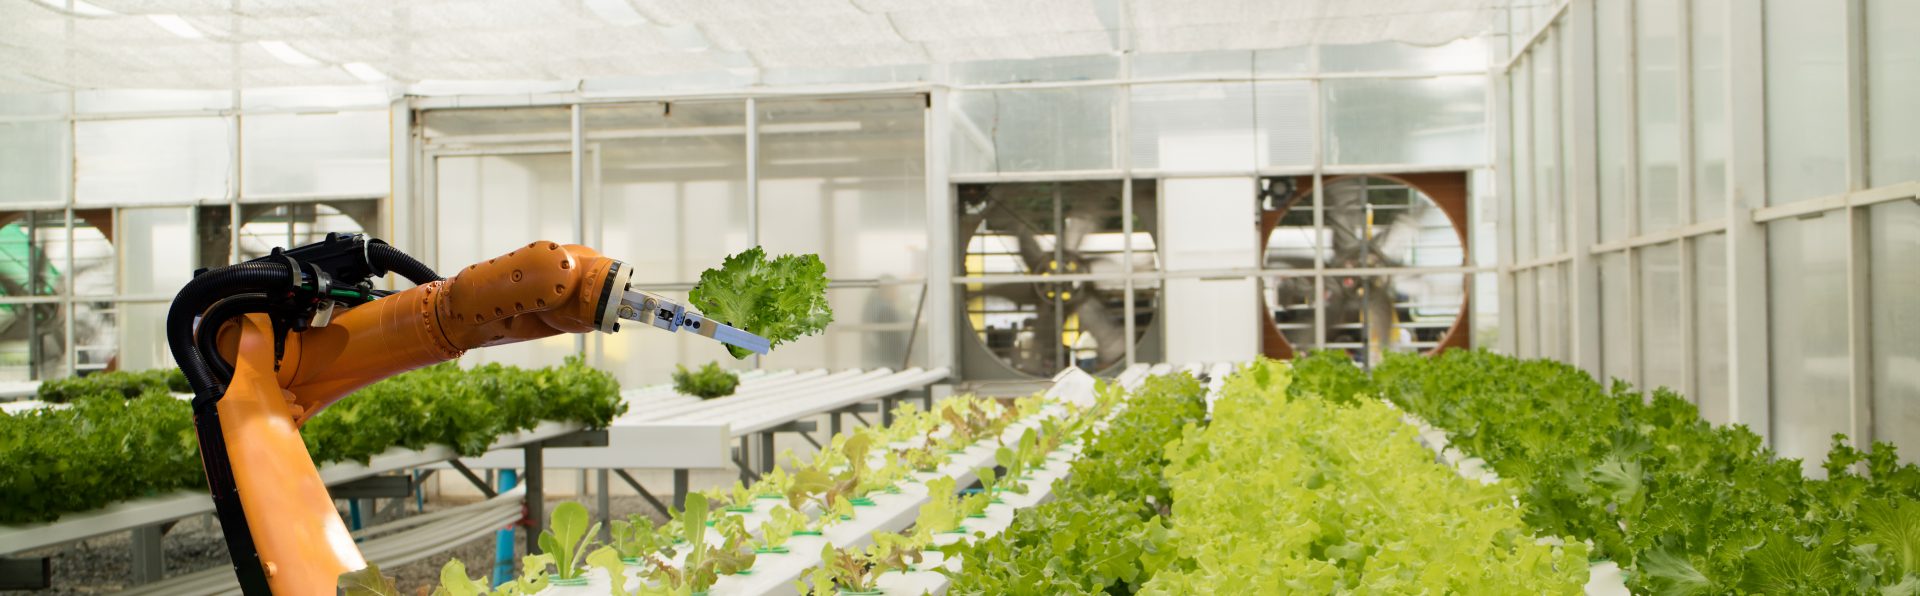 Smart robotic in agriculture futuristic concept, robot farmers (automation) must be programmed to work in the vertical or indoor farm for increase efficiency, growing a seed, harvesting, reduce time